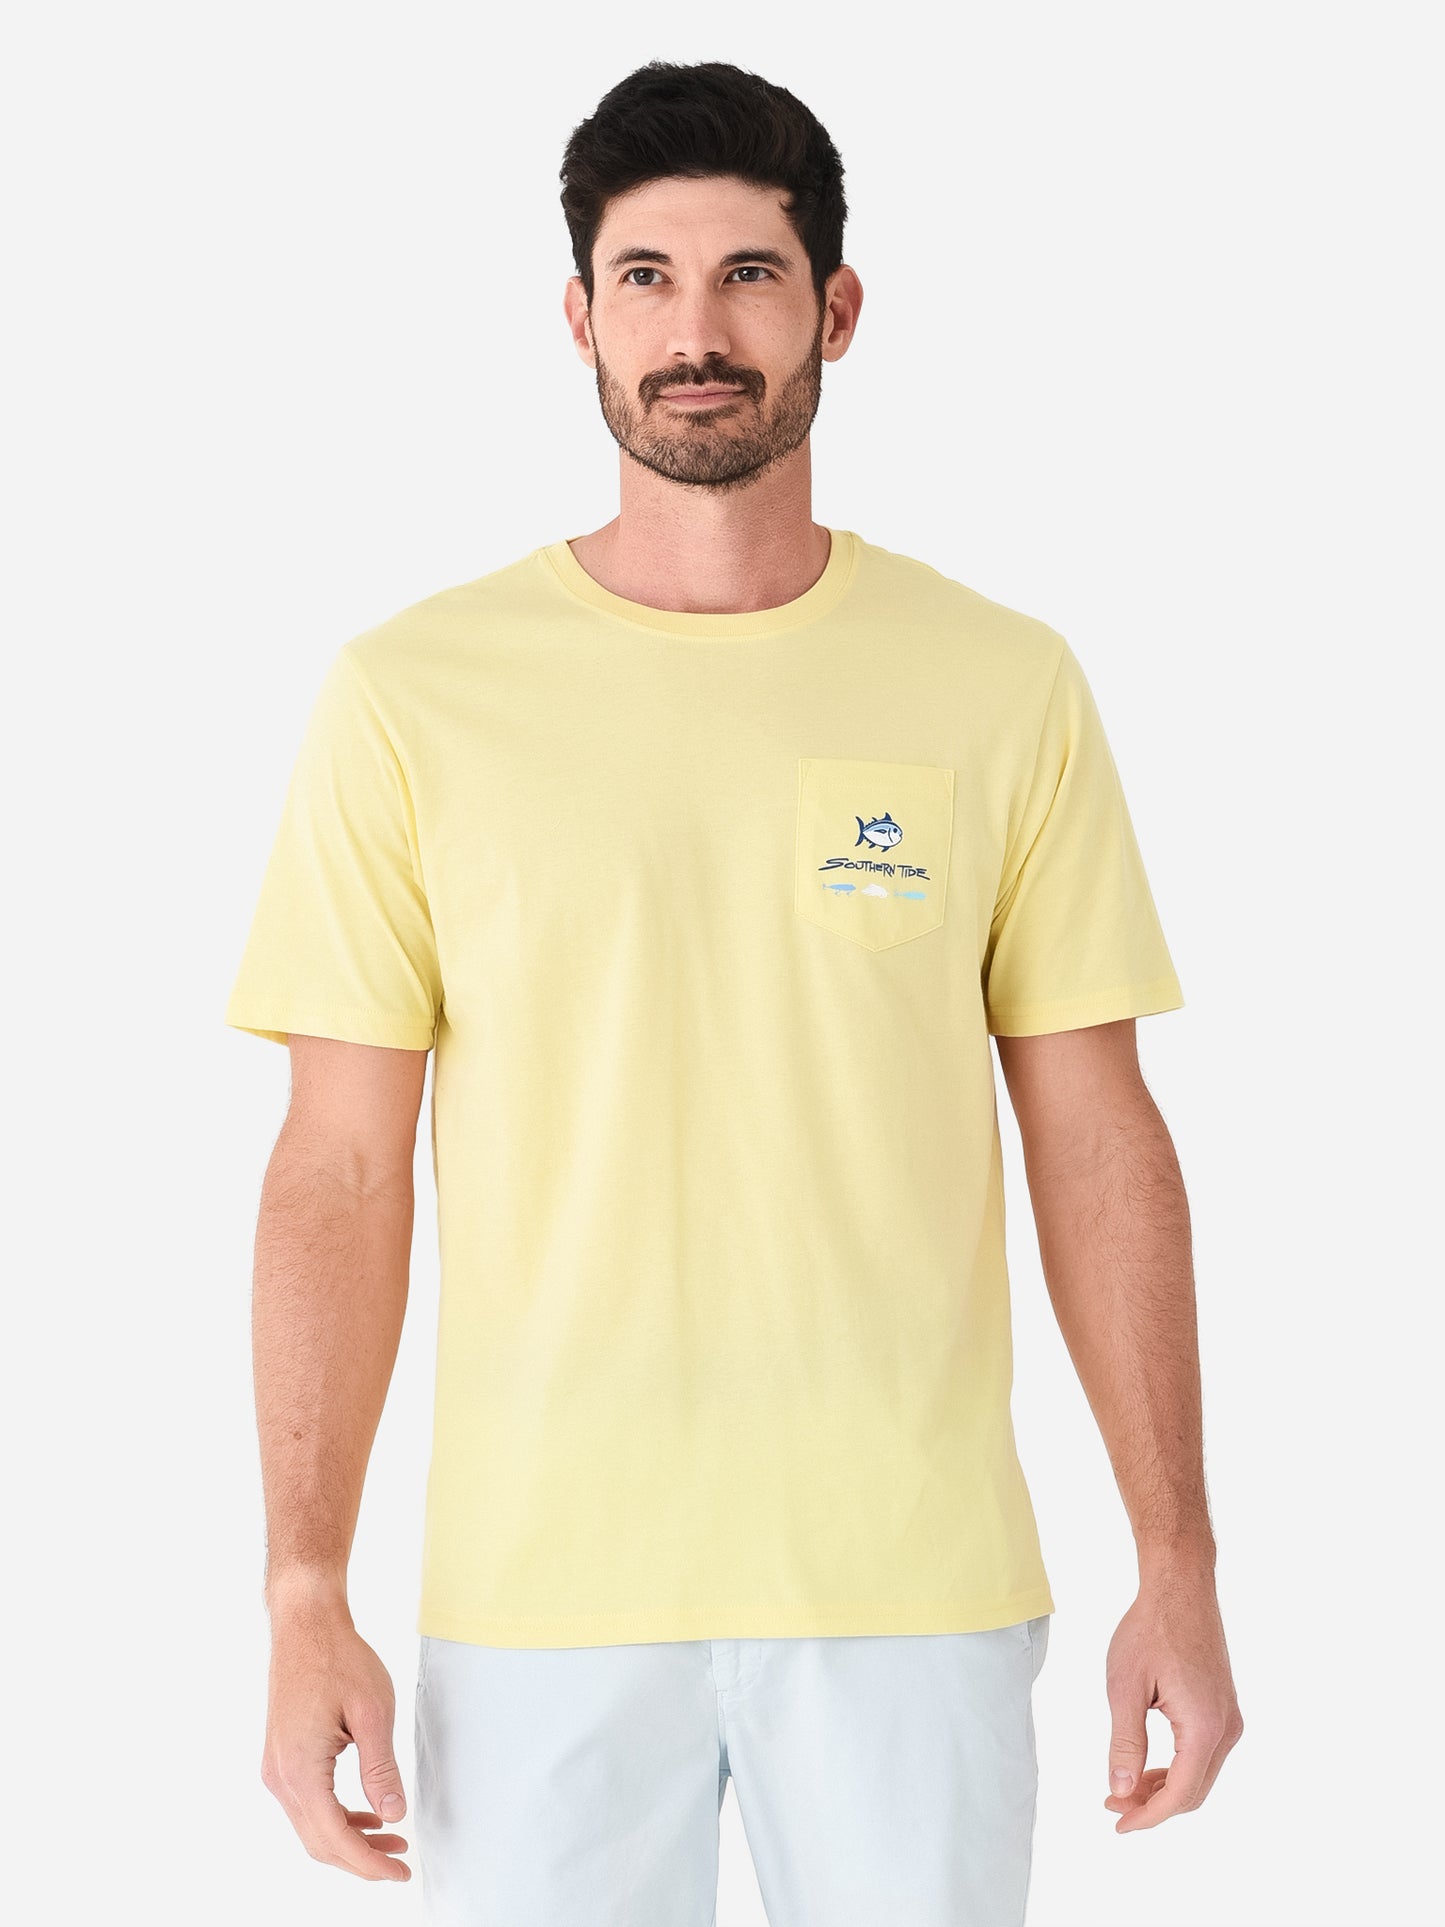 Southern Tide Men's Skipjack Expeditions T-Shirt